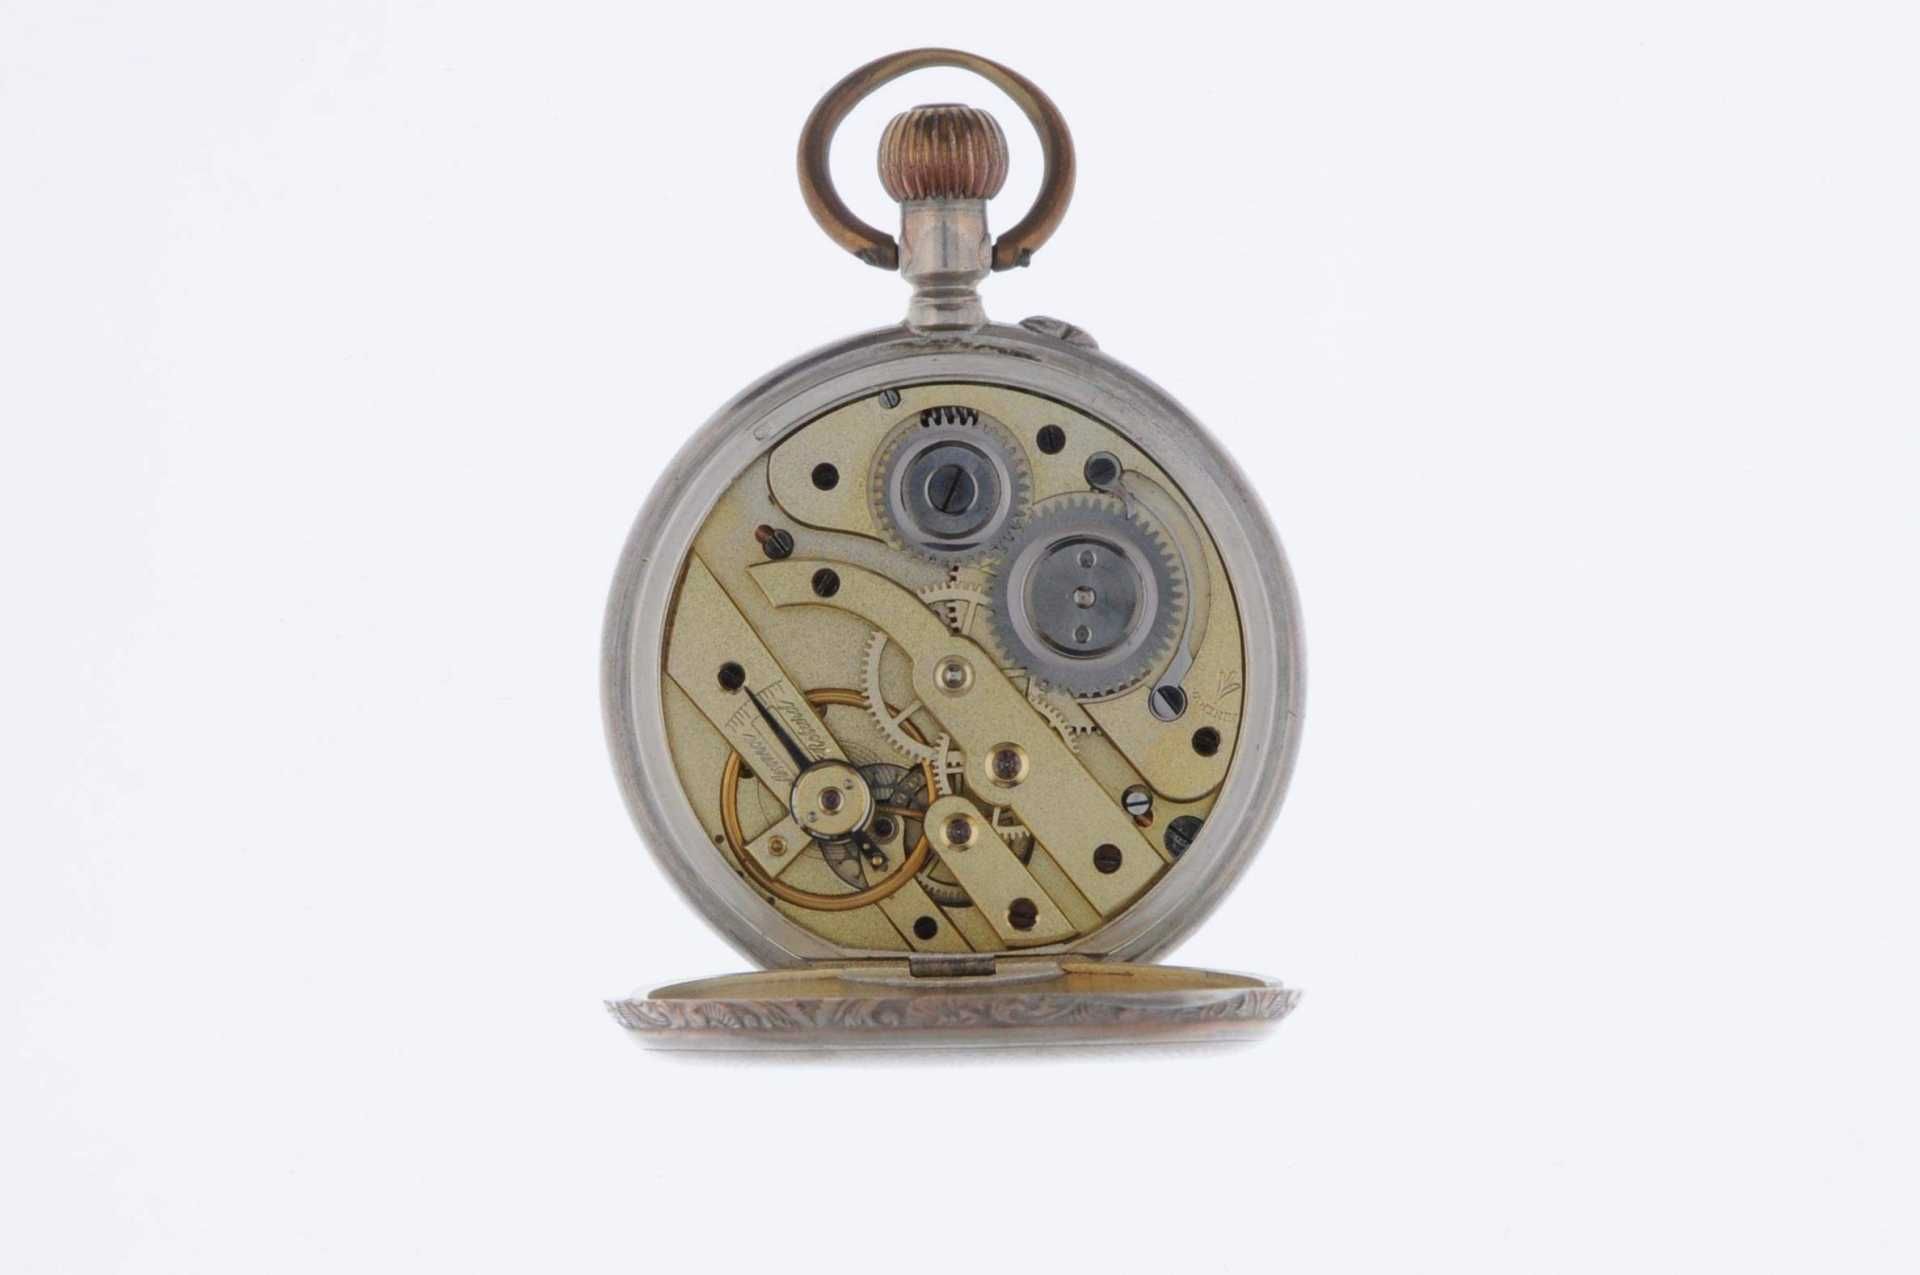 Spring cover pocket-watch \\\minerva\\\. Ca. 45 mm, about 1880-1900, Switzerland, 800er silver with - Image 5 of 5